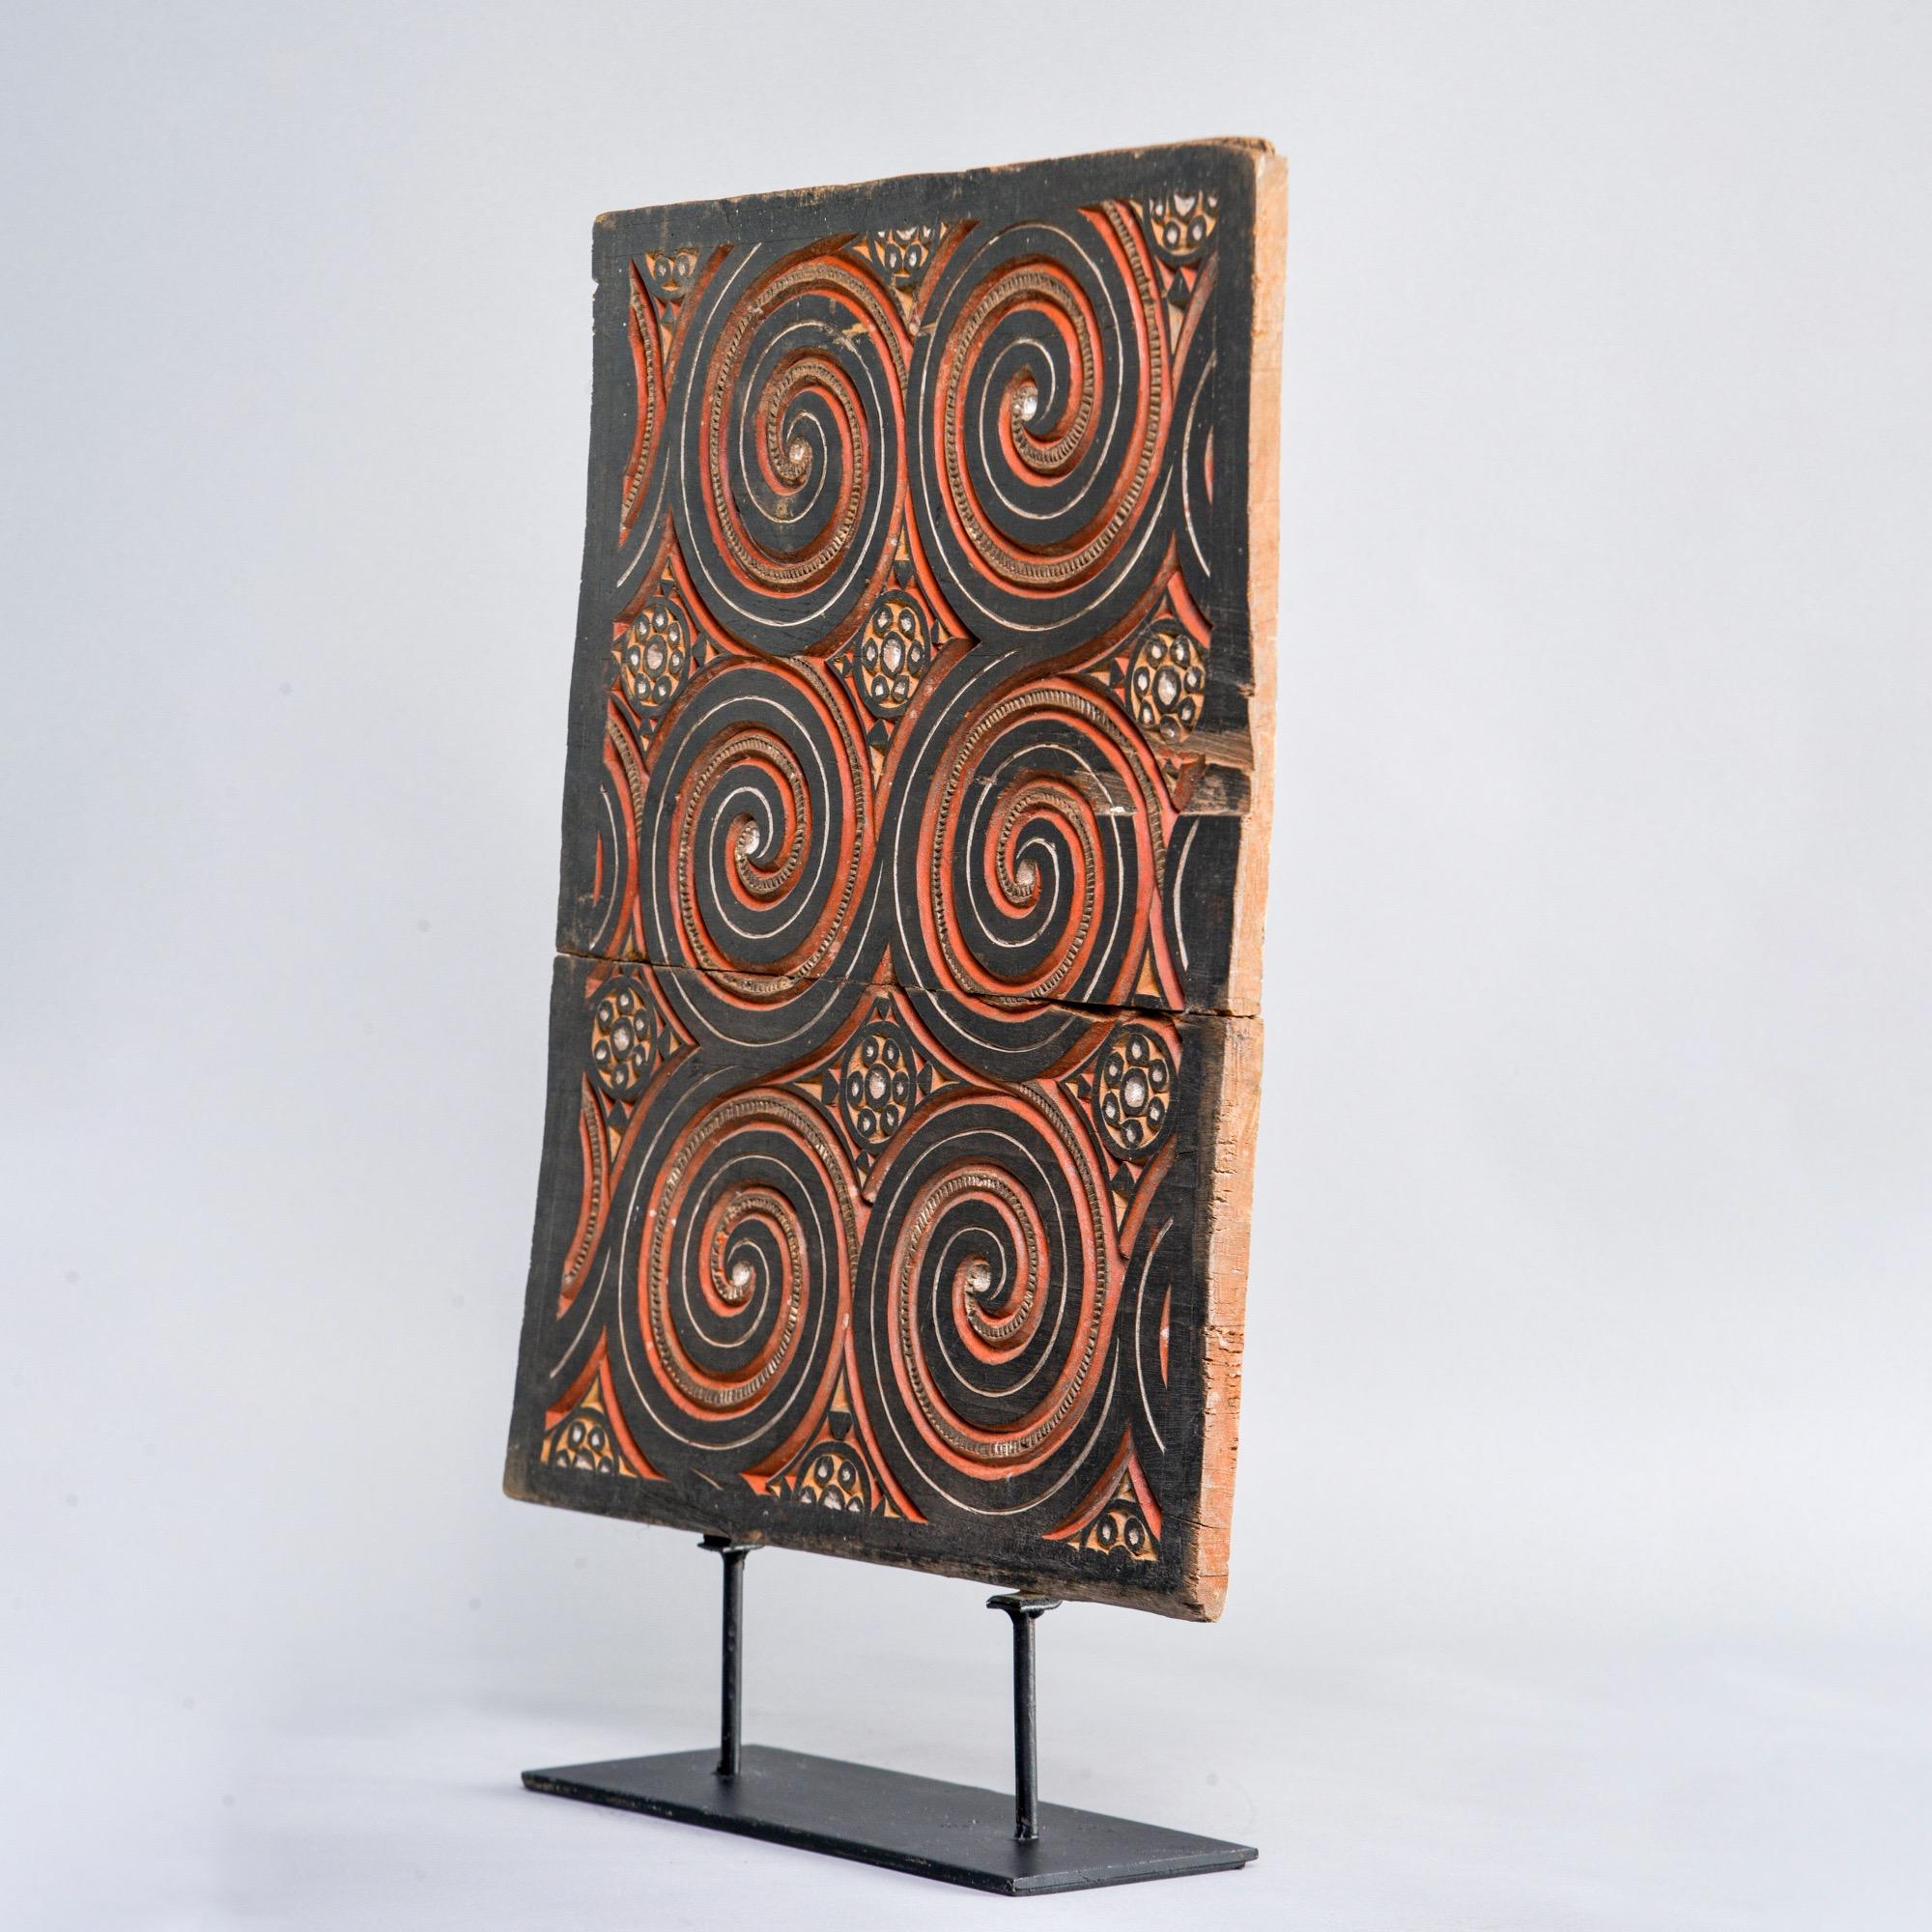 Circa 1930s carved and painted Indonesian wooden panel on black iron display stand. 